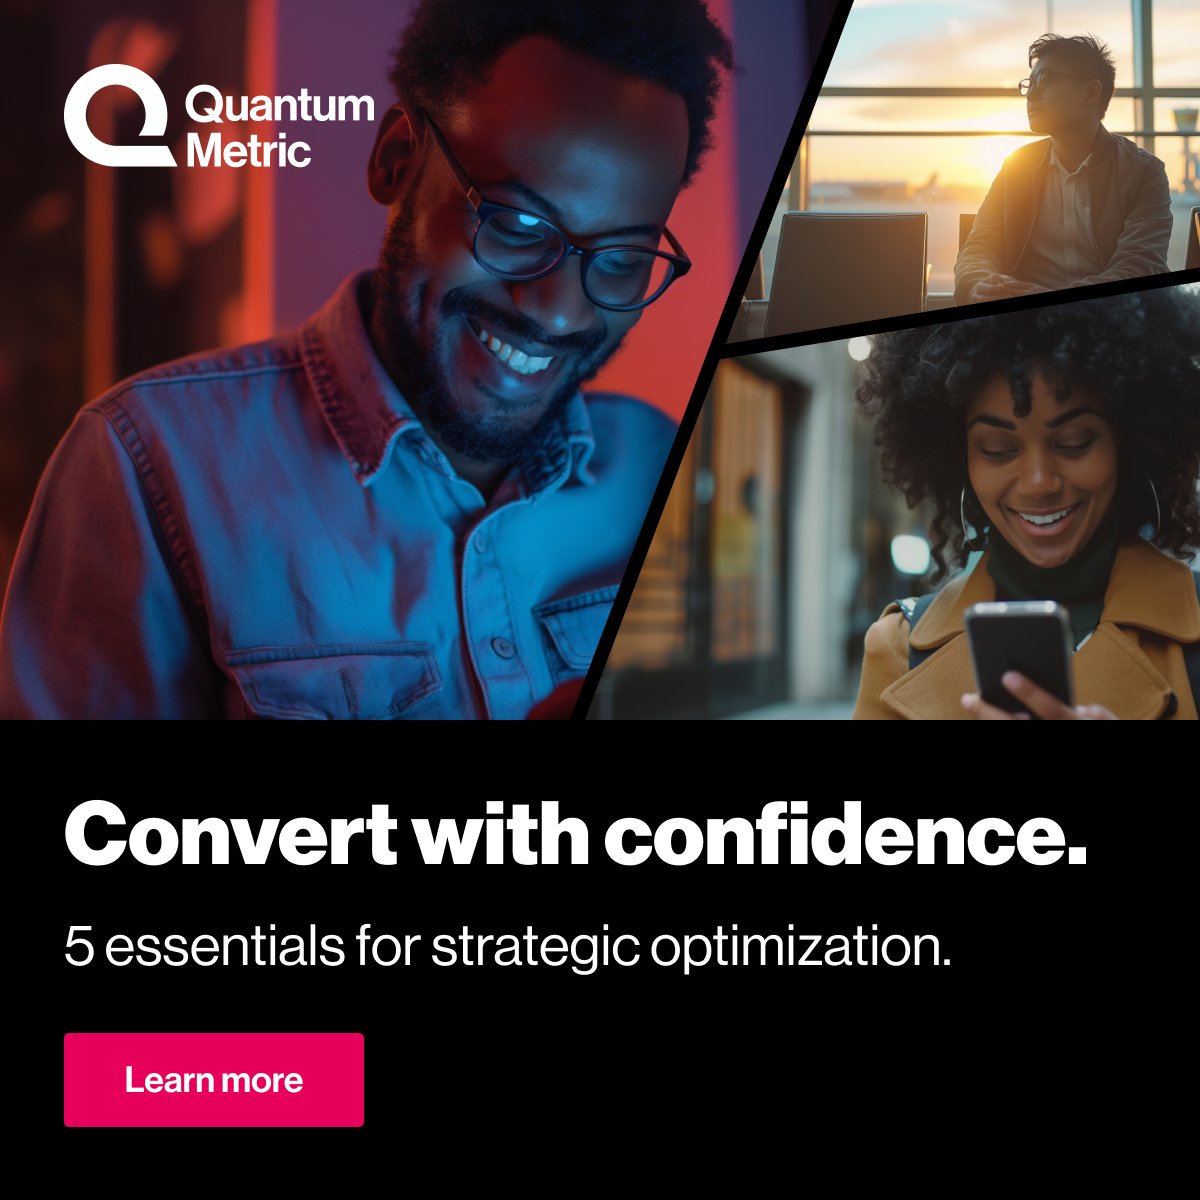 Unlock growth and redefine user experiences with our latest eBook. Master the art of strategic optimization and fully leverage your analytics technology. Learn more: hubs.ly/Q02t2dmB0